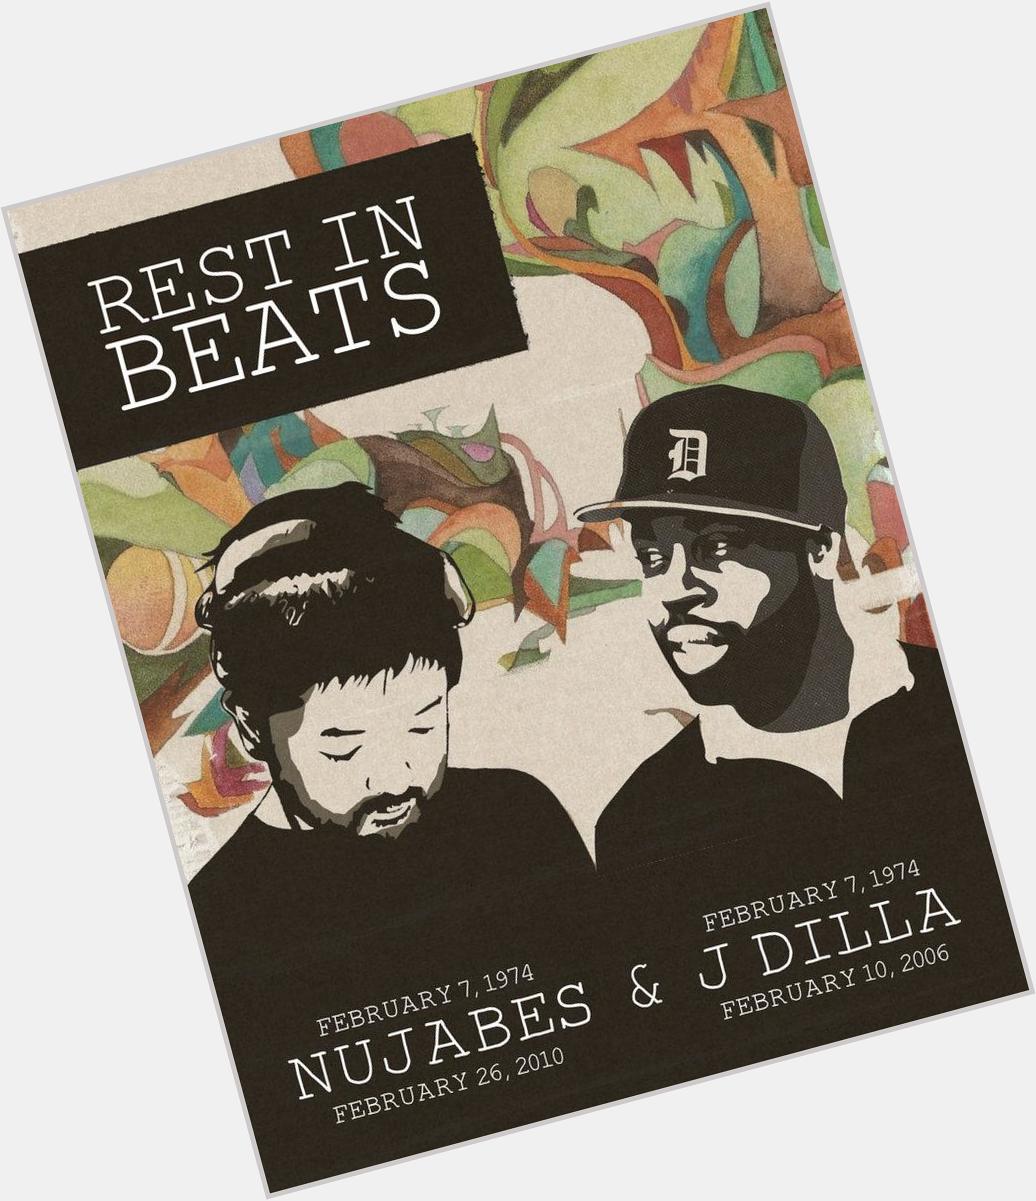 Happy Birthday J Dilla and Nujabes!  